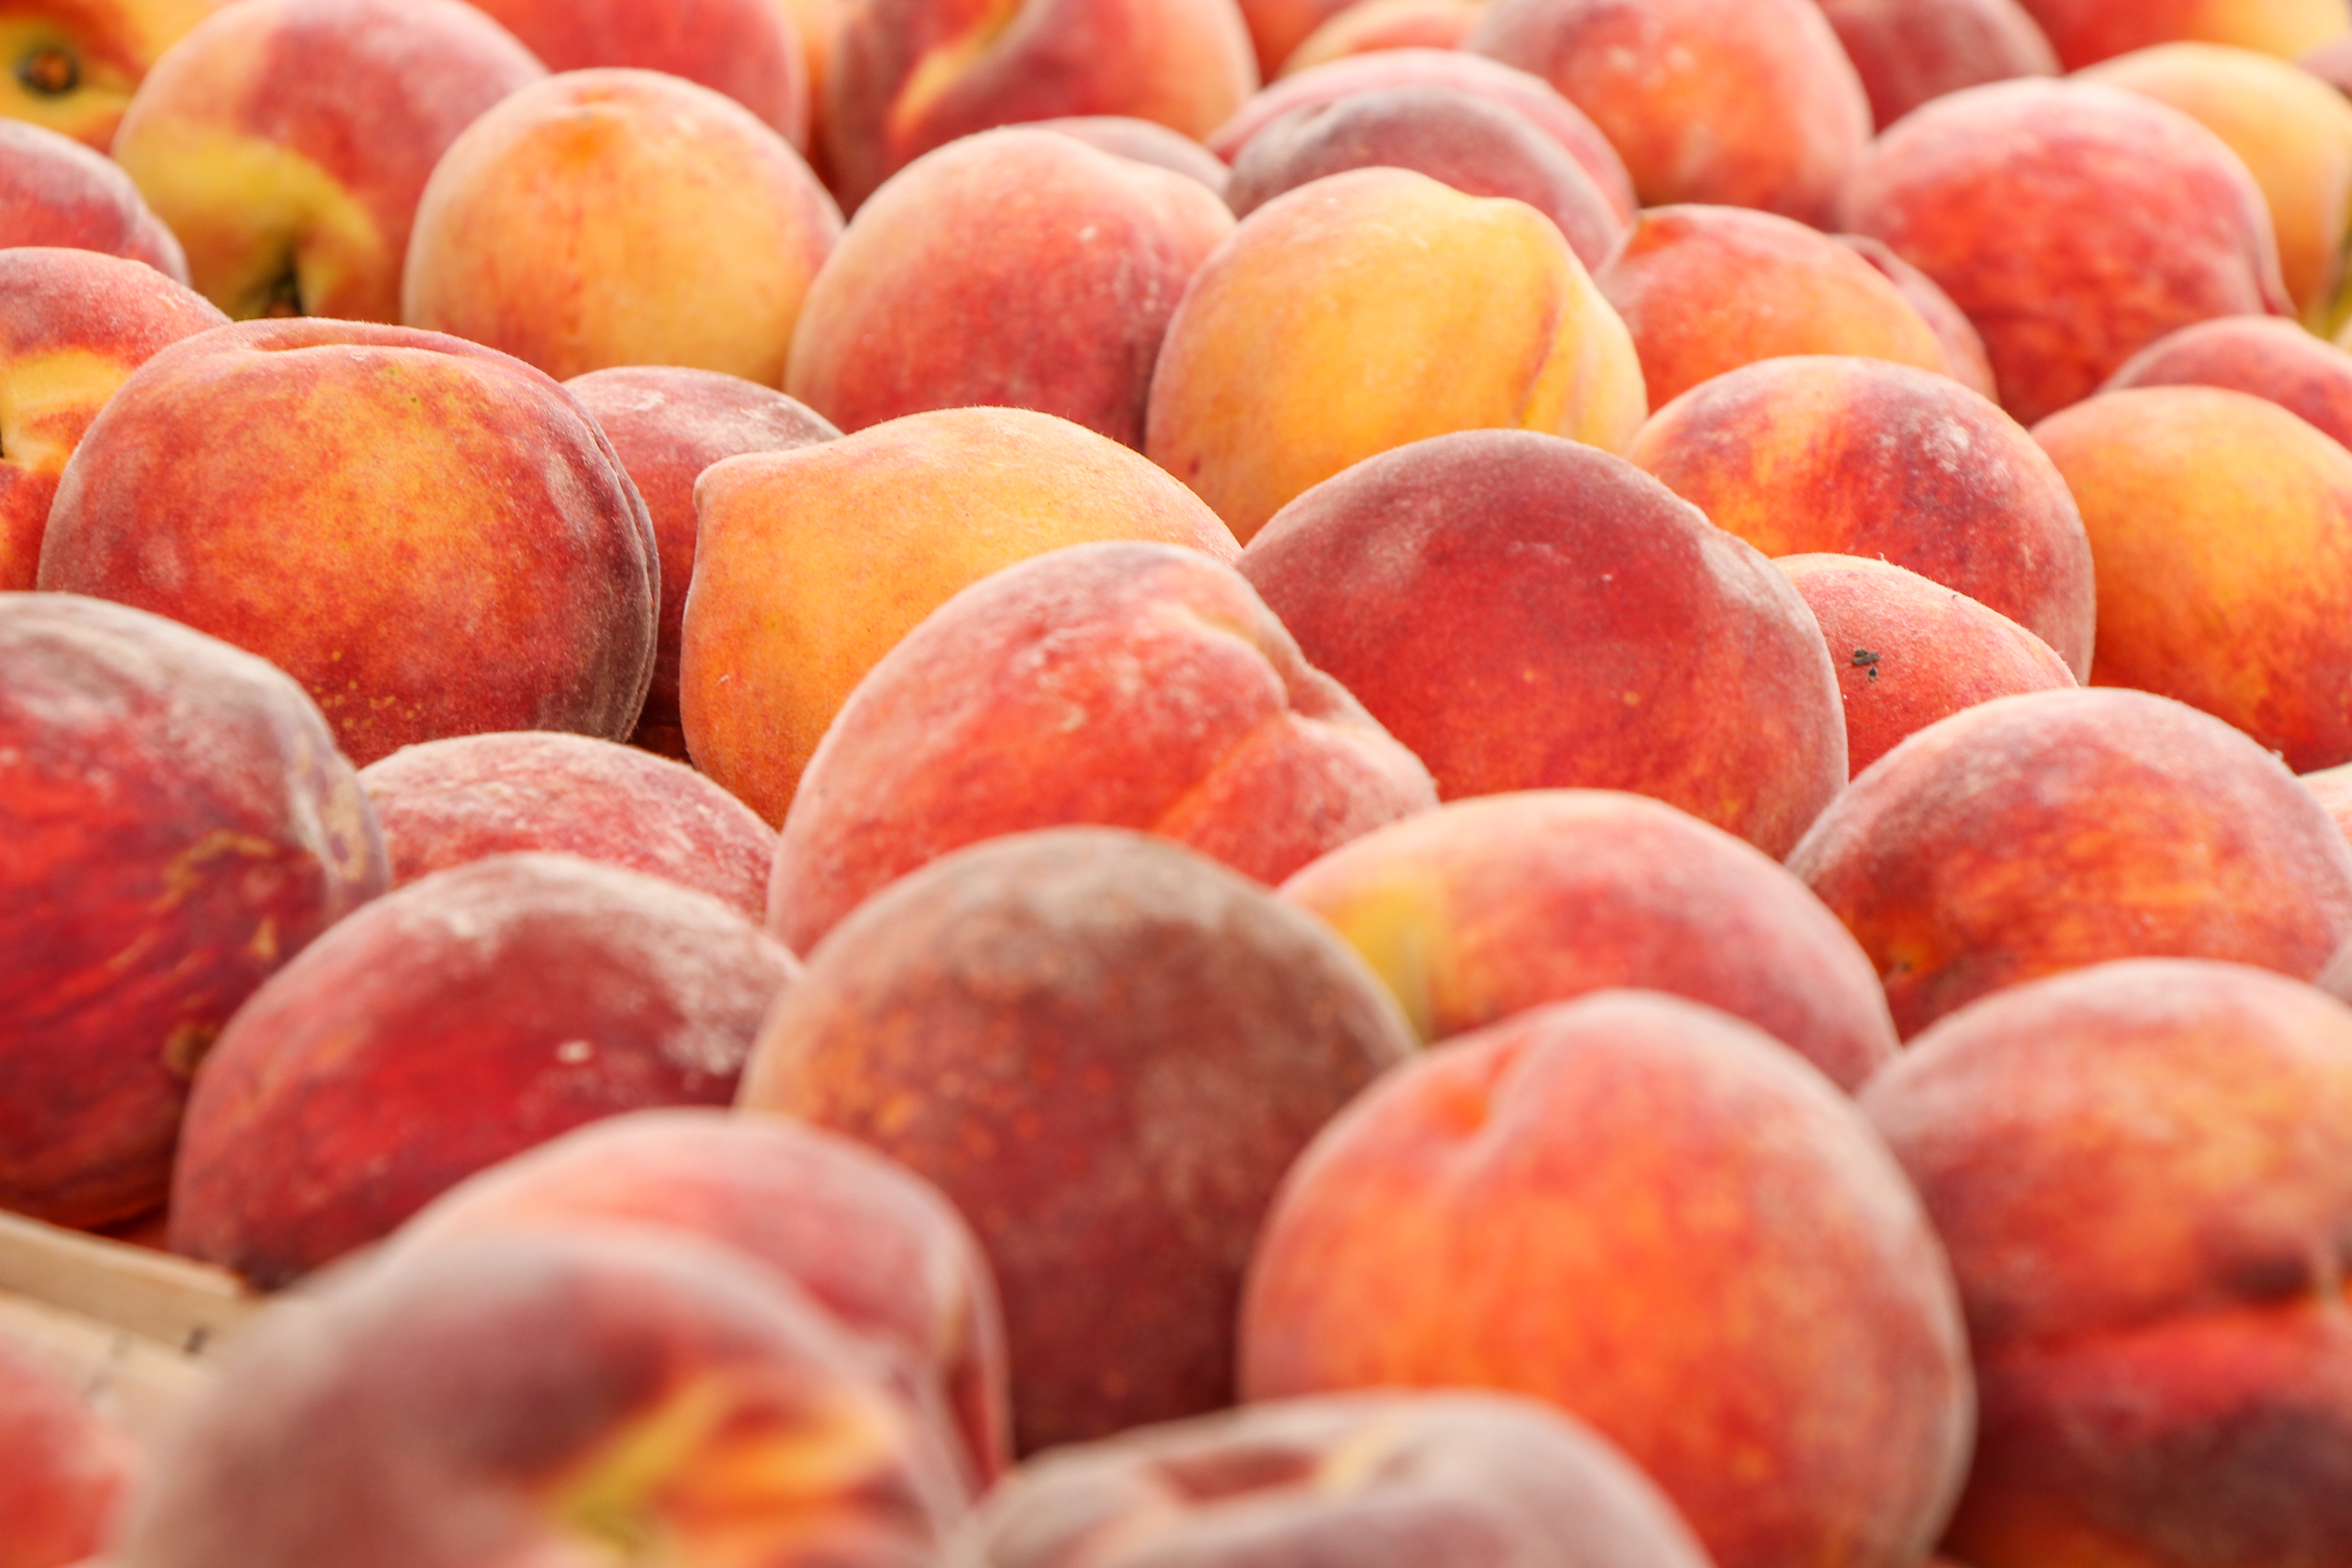 A flat of red haven peaches